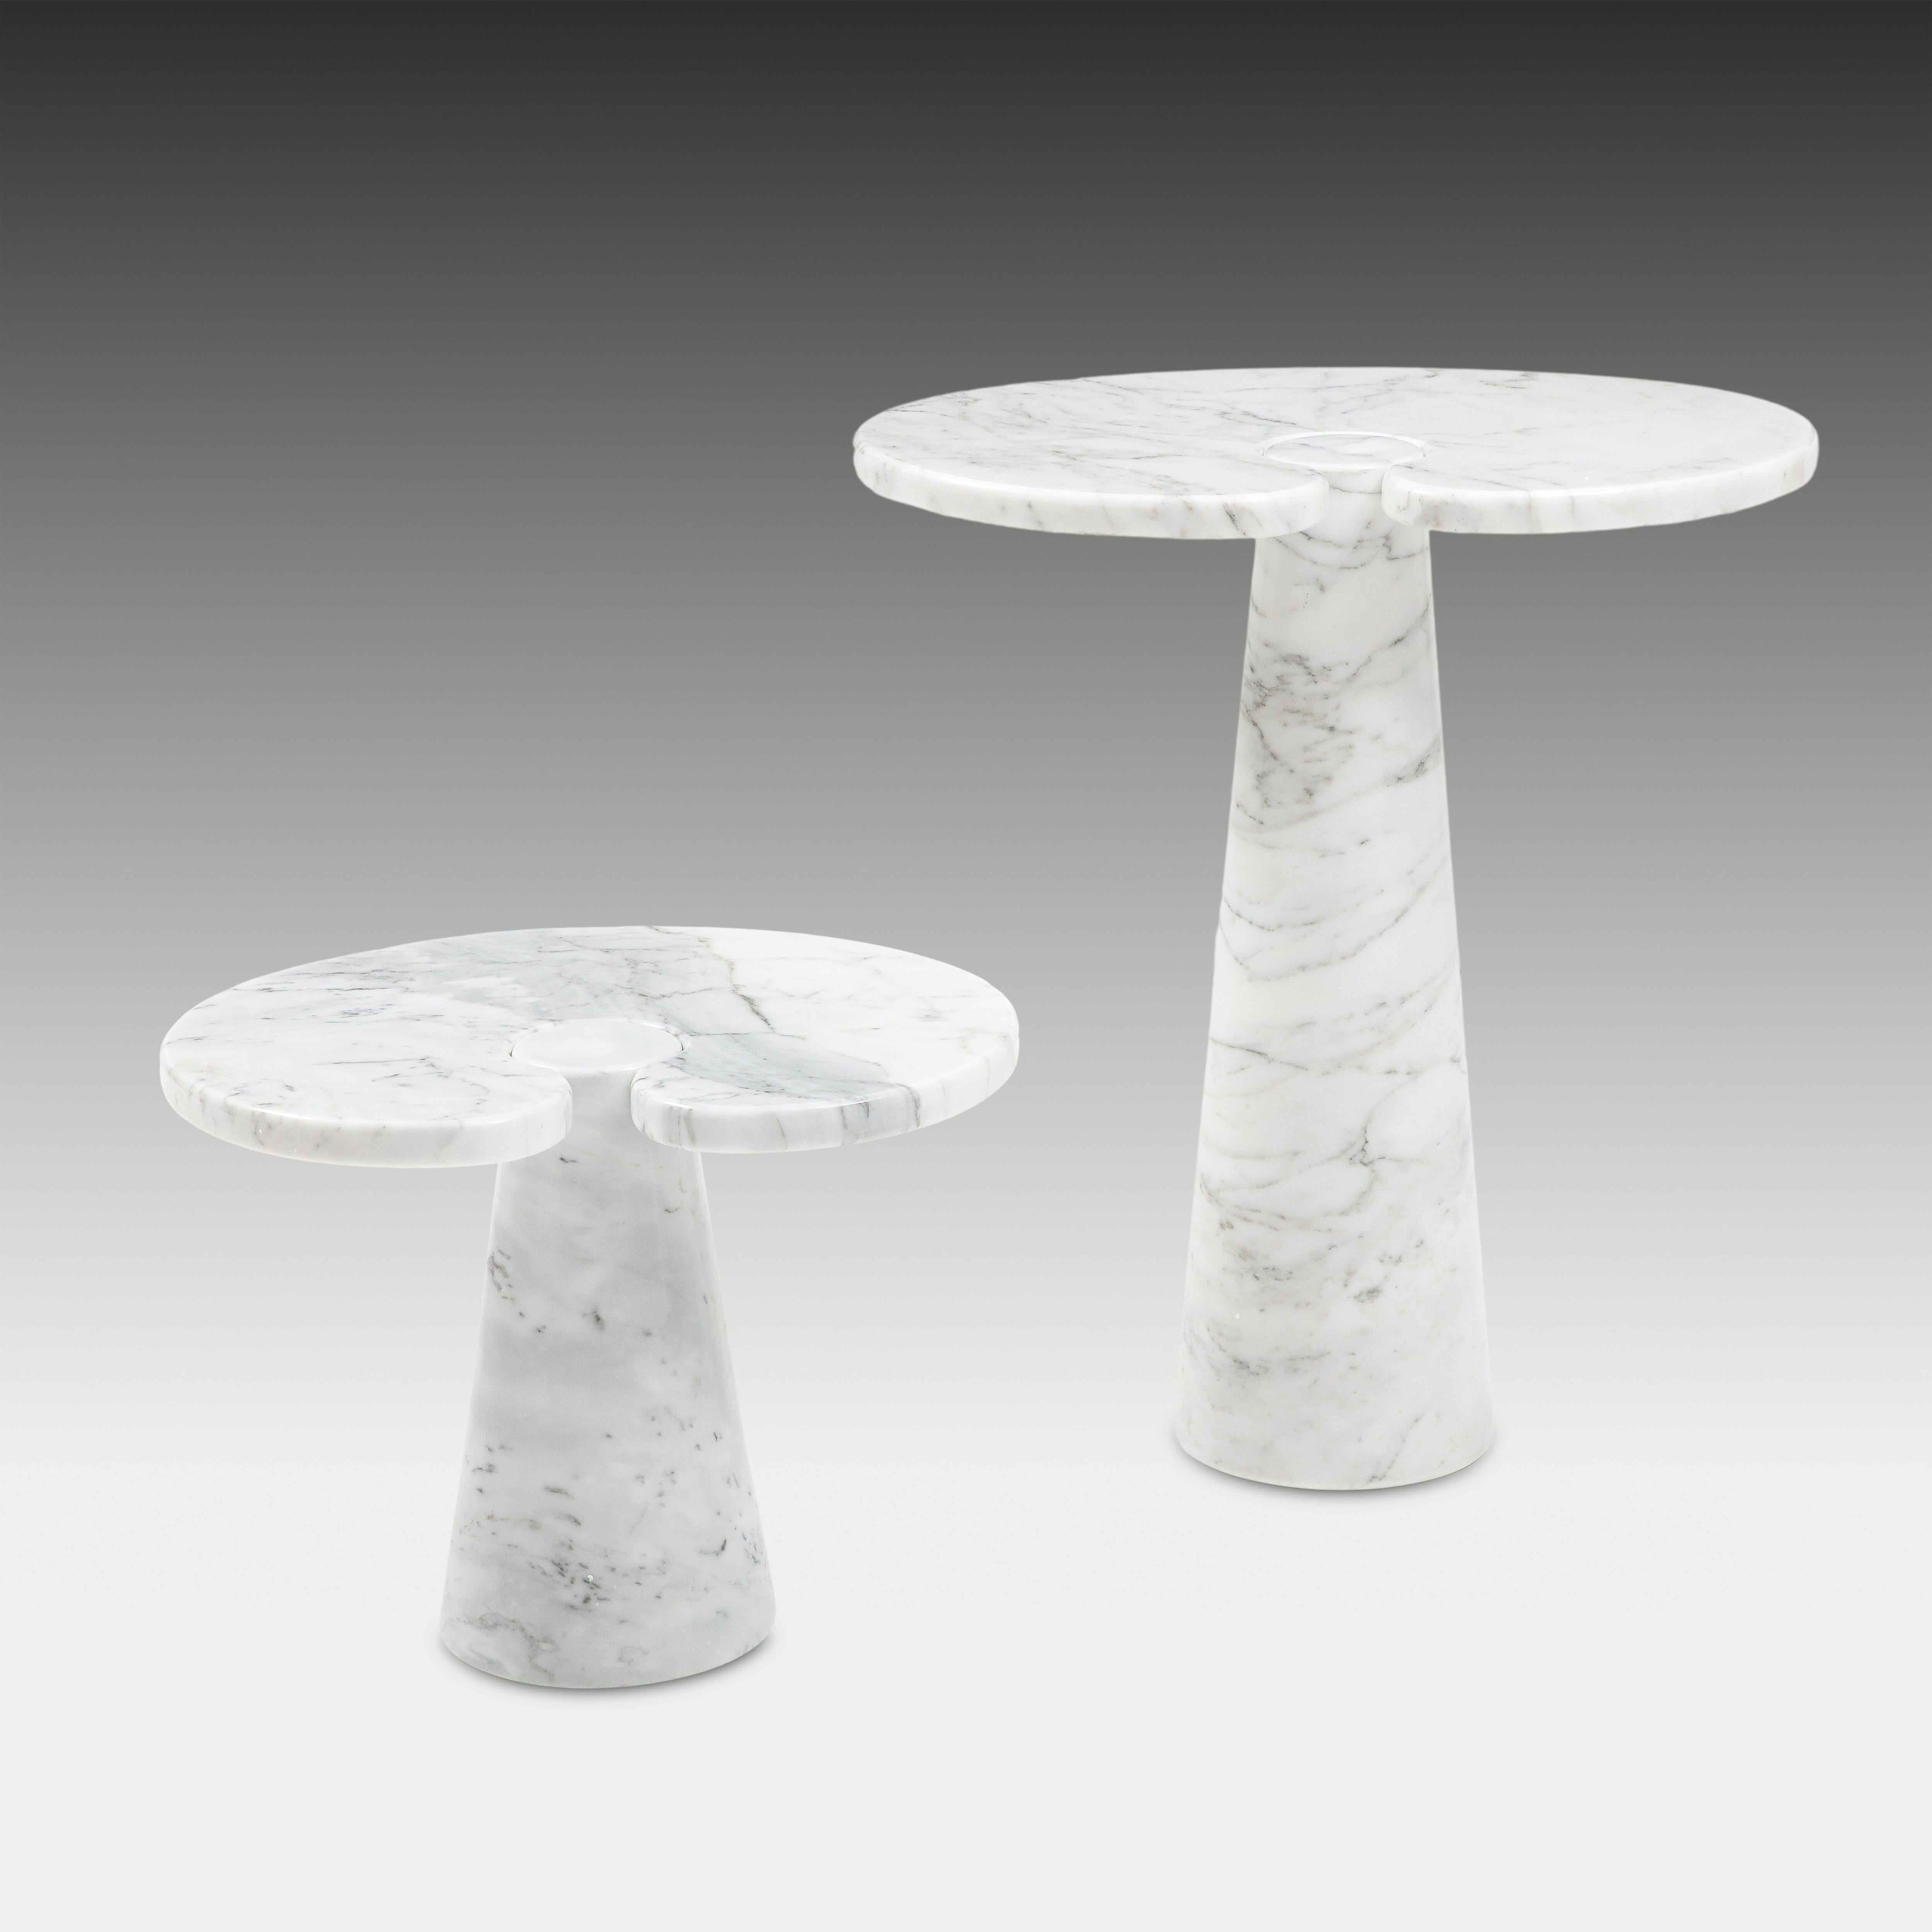 Angelo Mangiarotti Carrara Marble Tall Side Table from Eros Series, 1971 For Sale 3